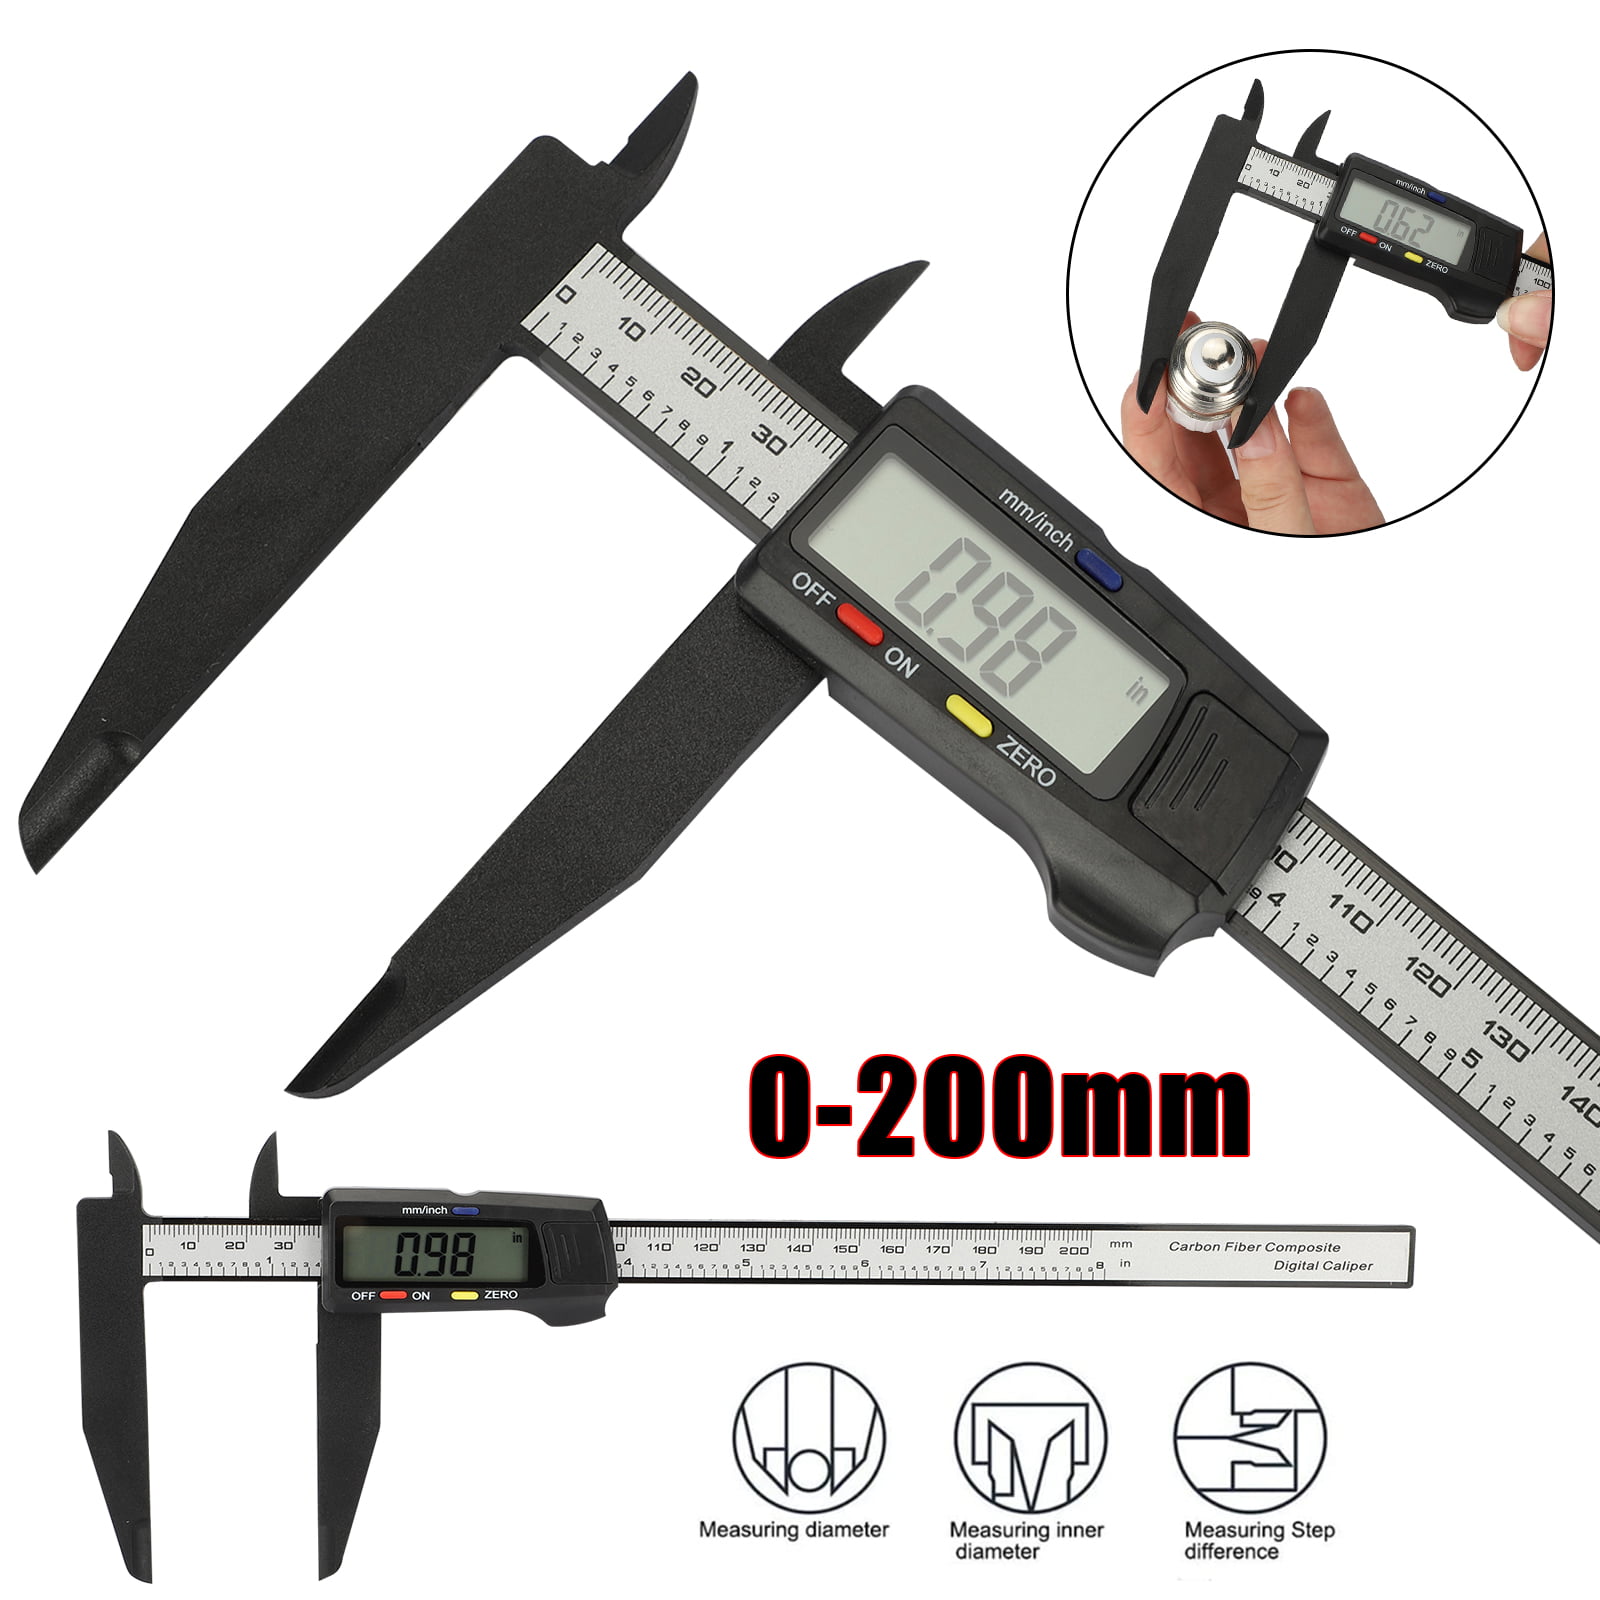 Calipers Electronic Digital Caliper Stainless Steel Vernier Caliper High Precision Industrial Measuring Tools Range 0-200mm Small 